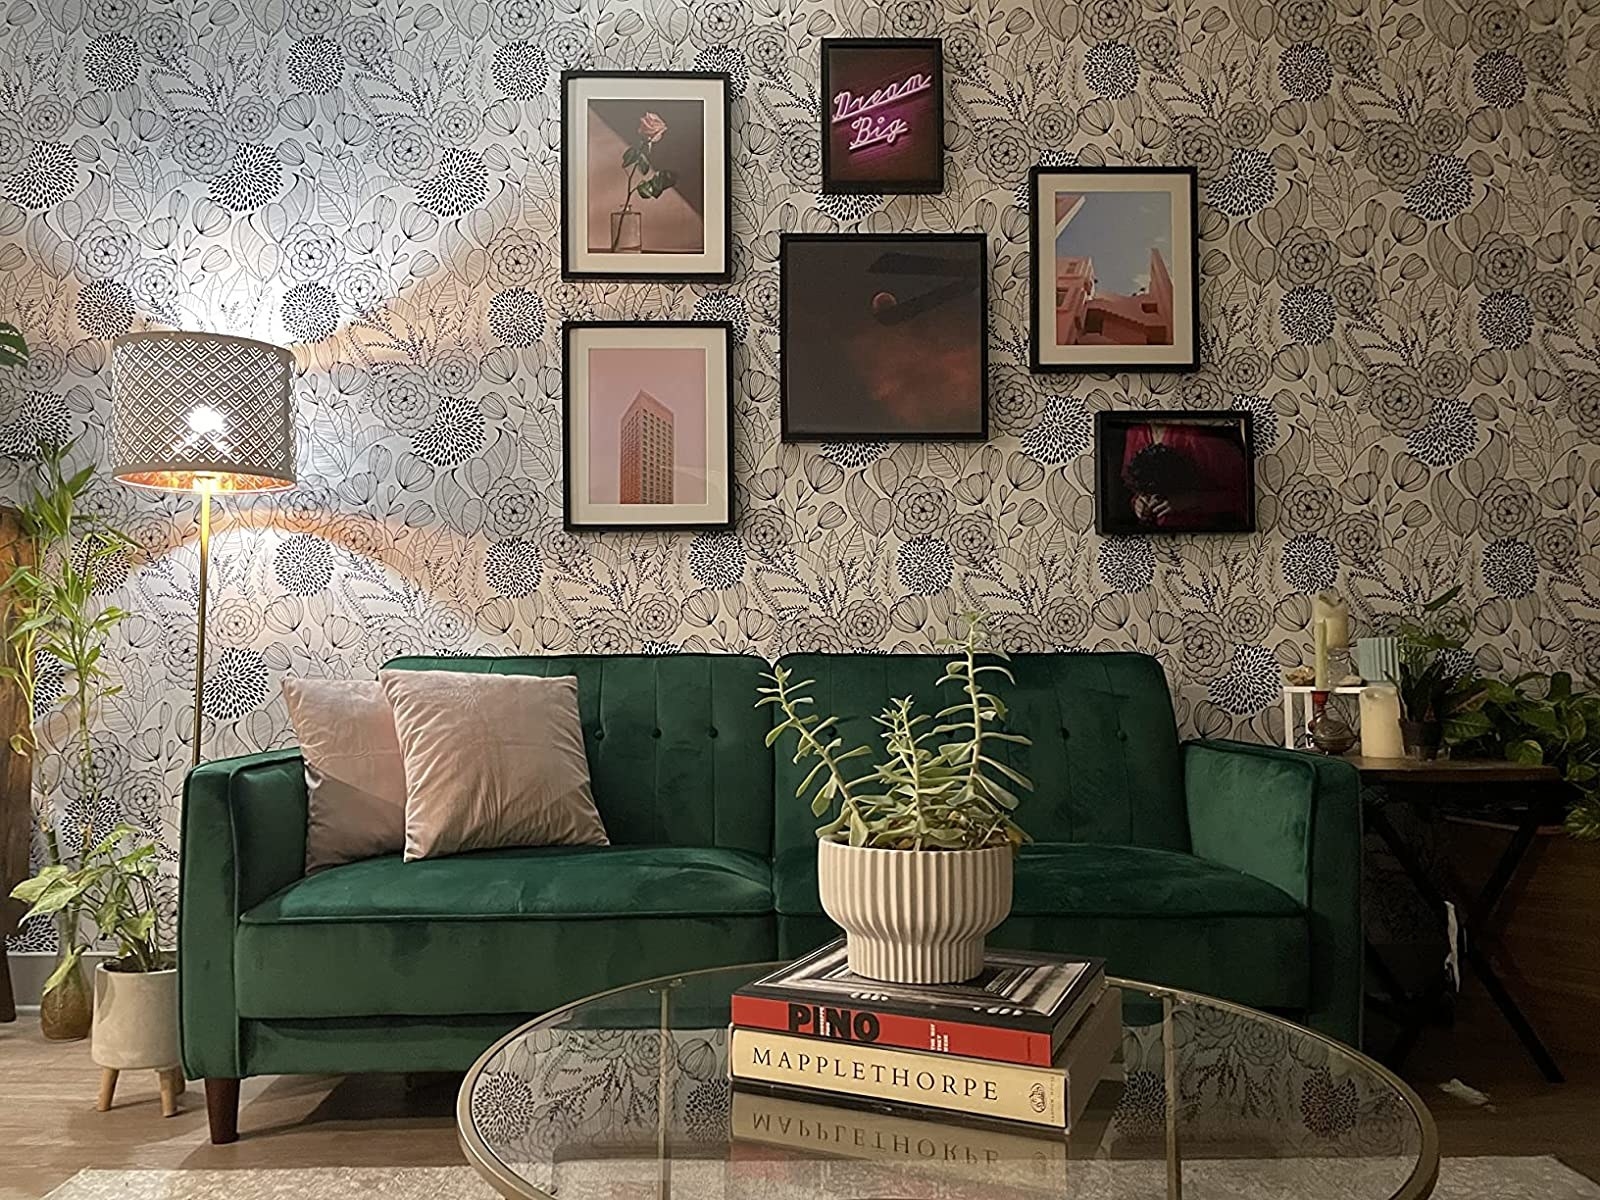 Reviewer image of wallpaper behind green couch in living room